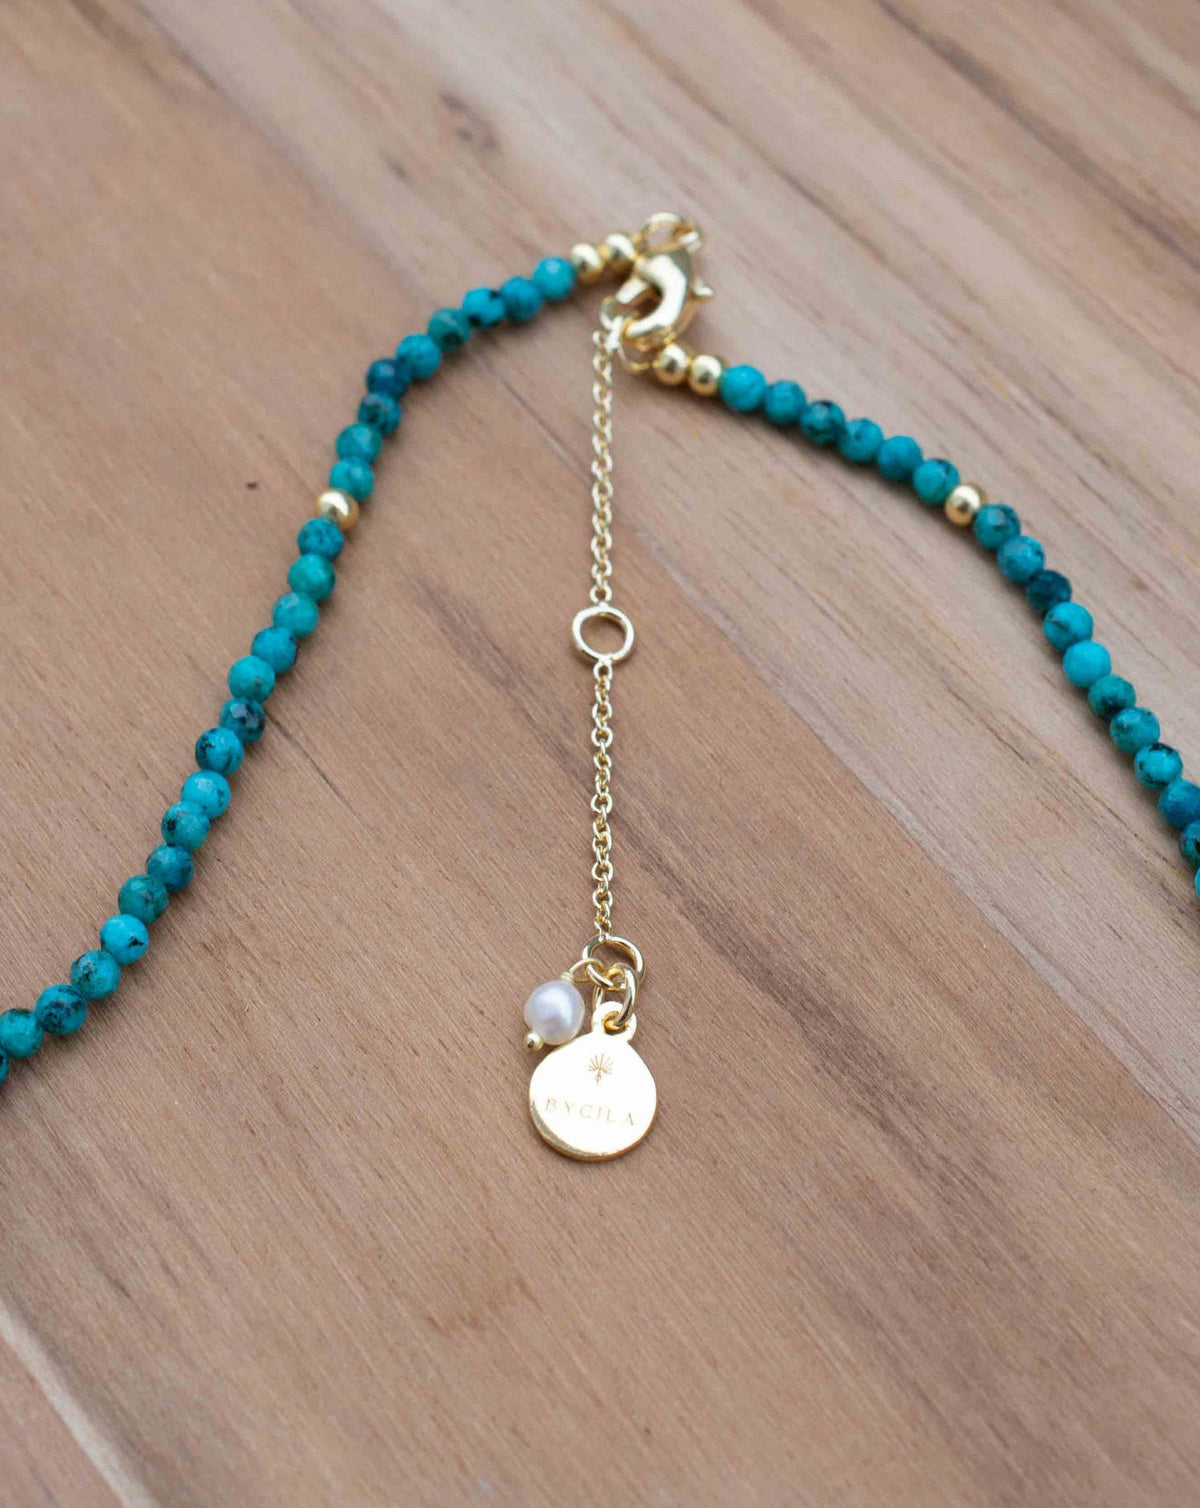 Turquoise, Labradorite and Rose Quartz Necklace* Gold Plated * Handmade * Layered * Gemstone * Birthstone * Gift for Her *BJN178